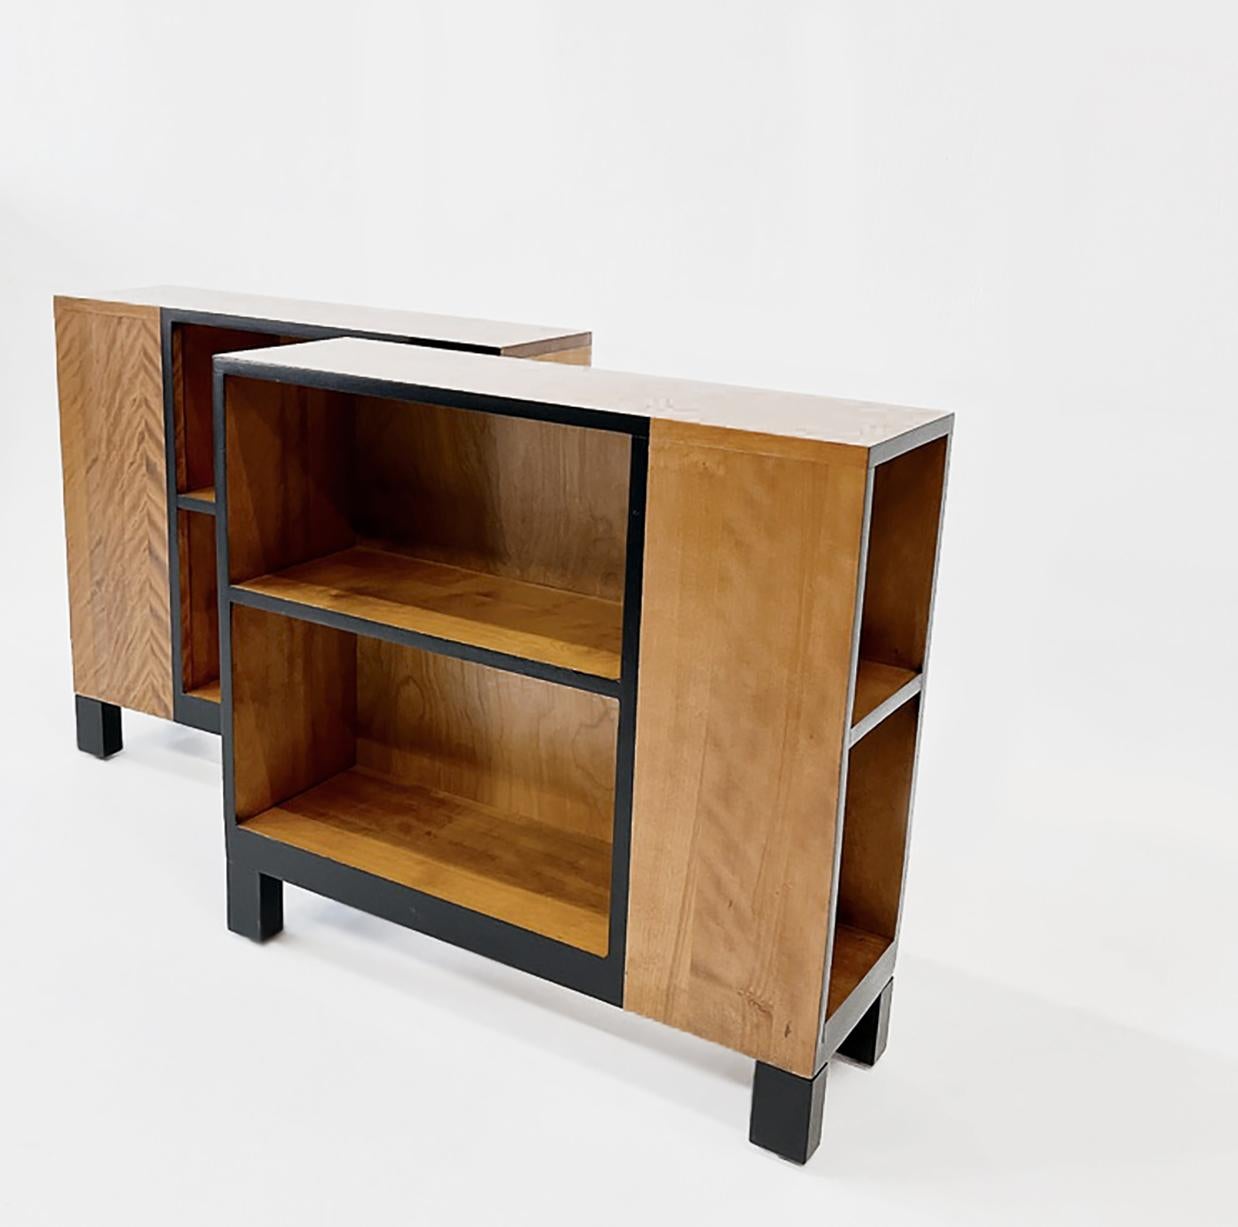 Fruitwood wood shelves produced in the two important exhibitions of the time, by the American Designers' Gallery, which featured a core group of architect-designers, including Karasz, and Donald Deskey, Martha Ryther, Henry Varnum Poor, Joseph